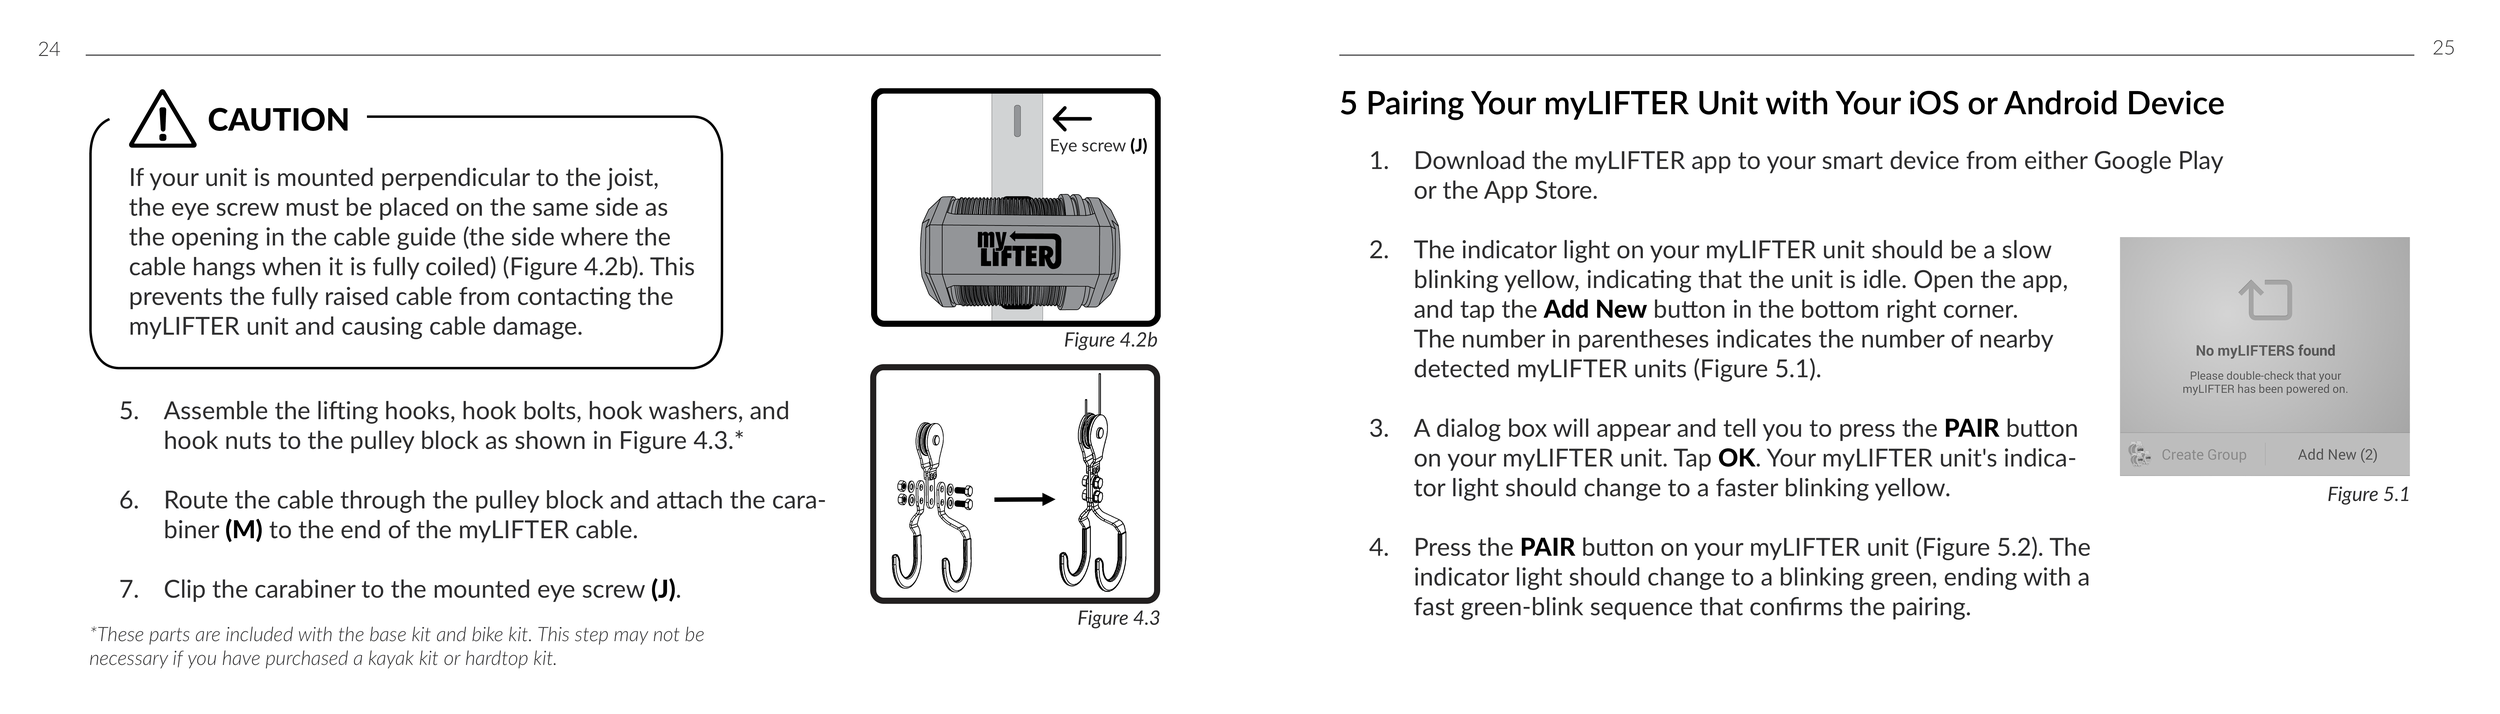 myLIFTER manual12.png